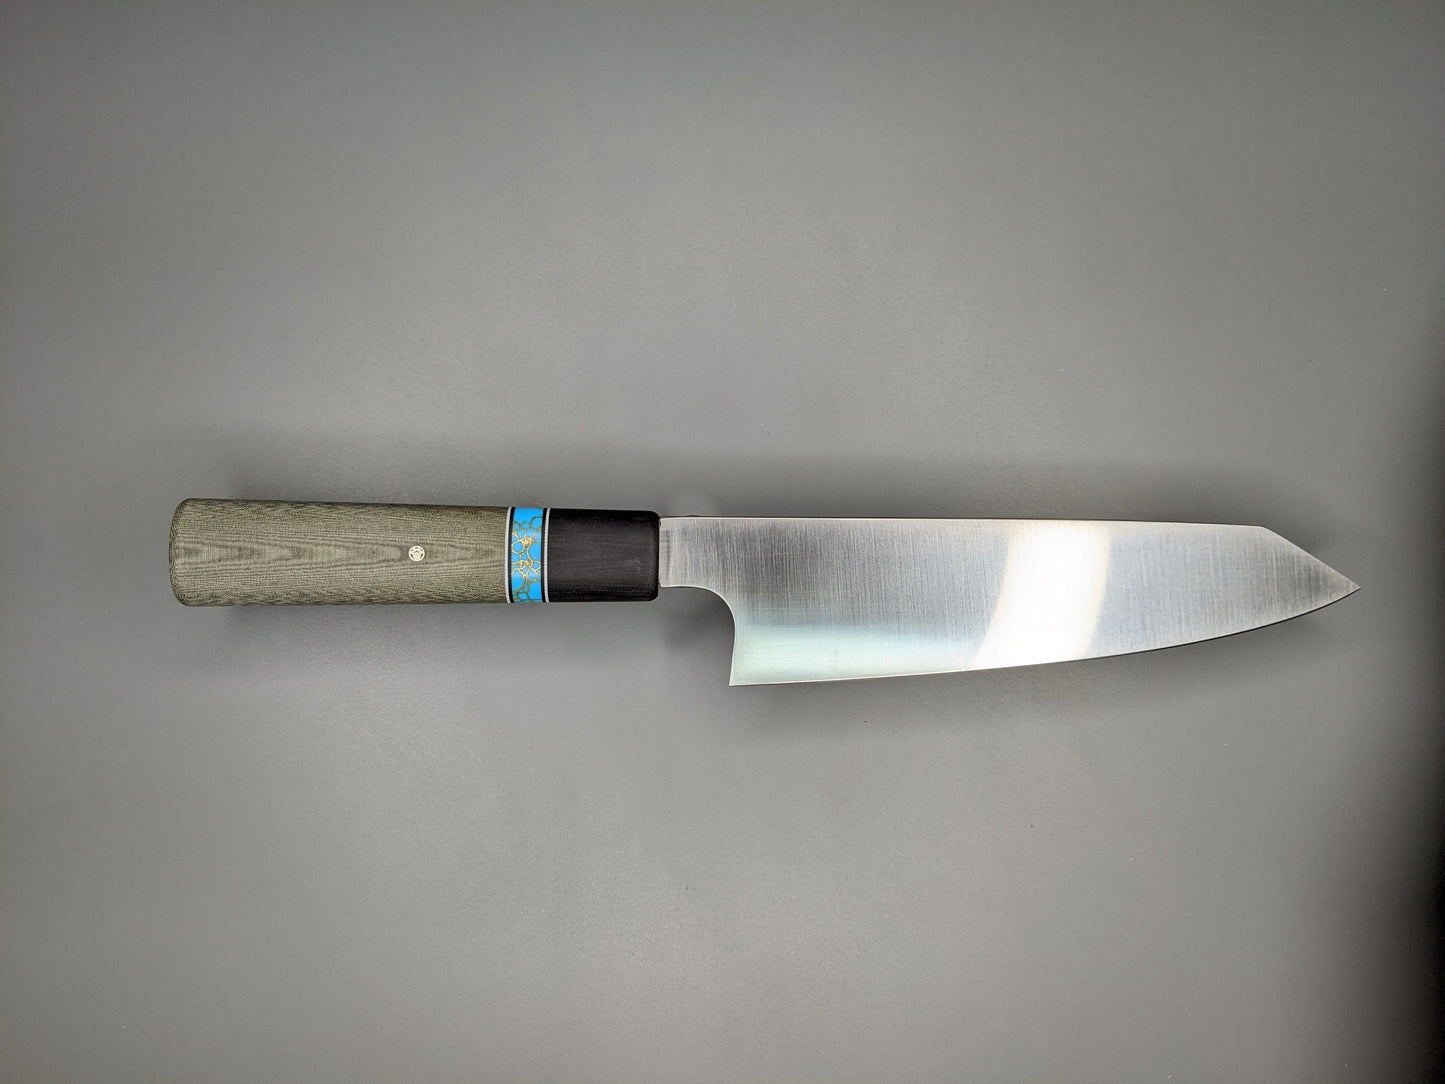 Japanese style kitchen knife with Green Micarta handle and black bolster.